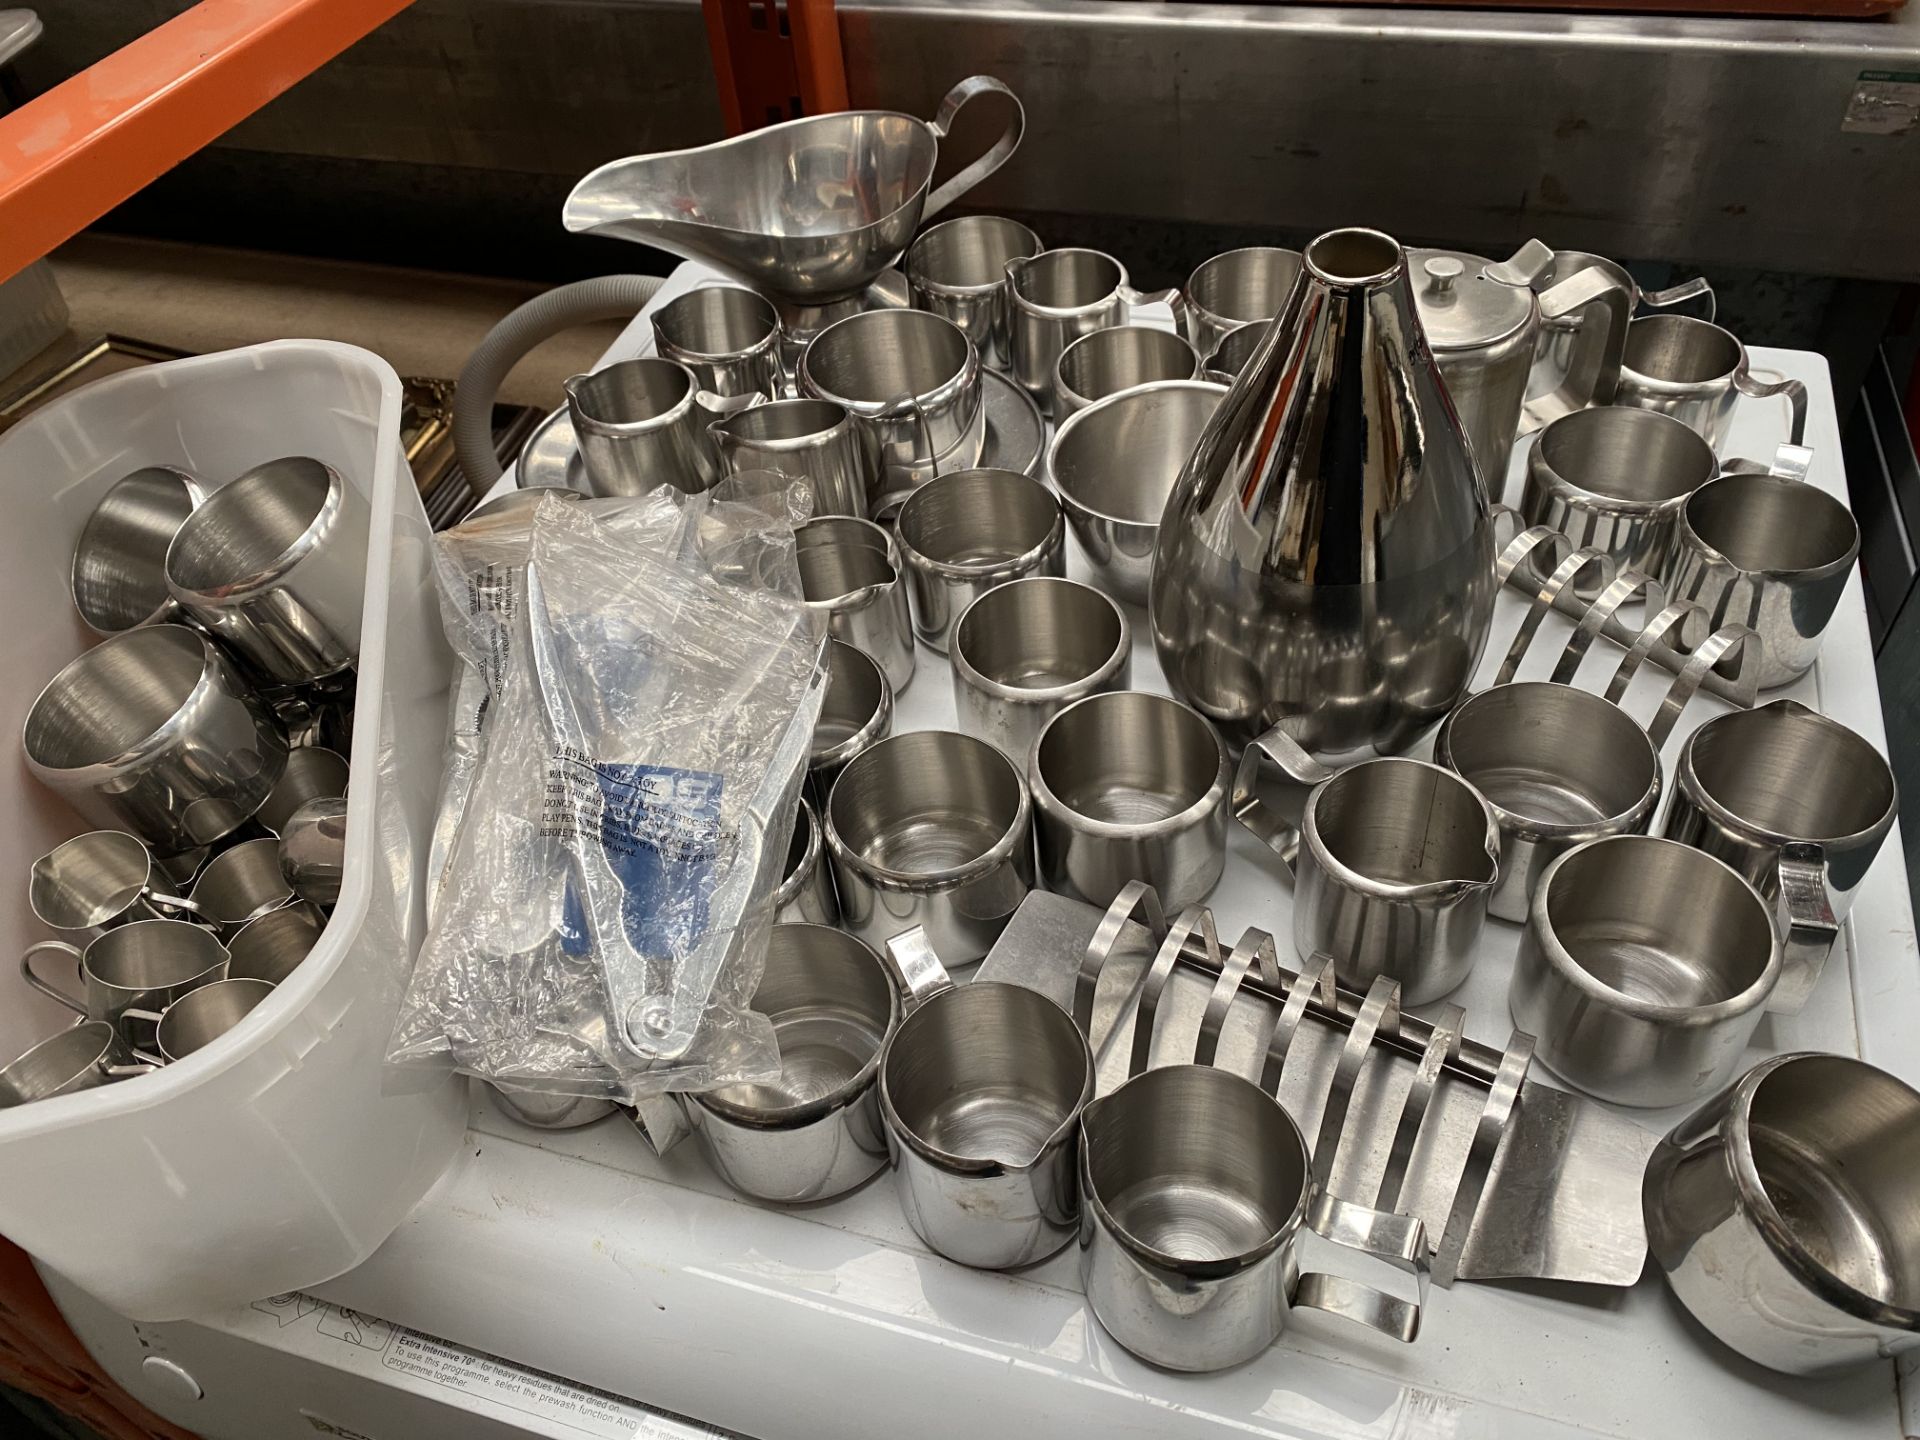 Large Quantity of Stainless steel items